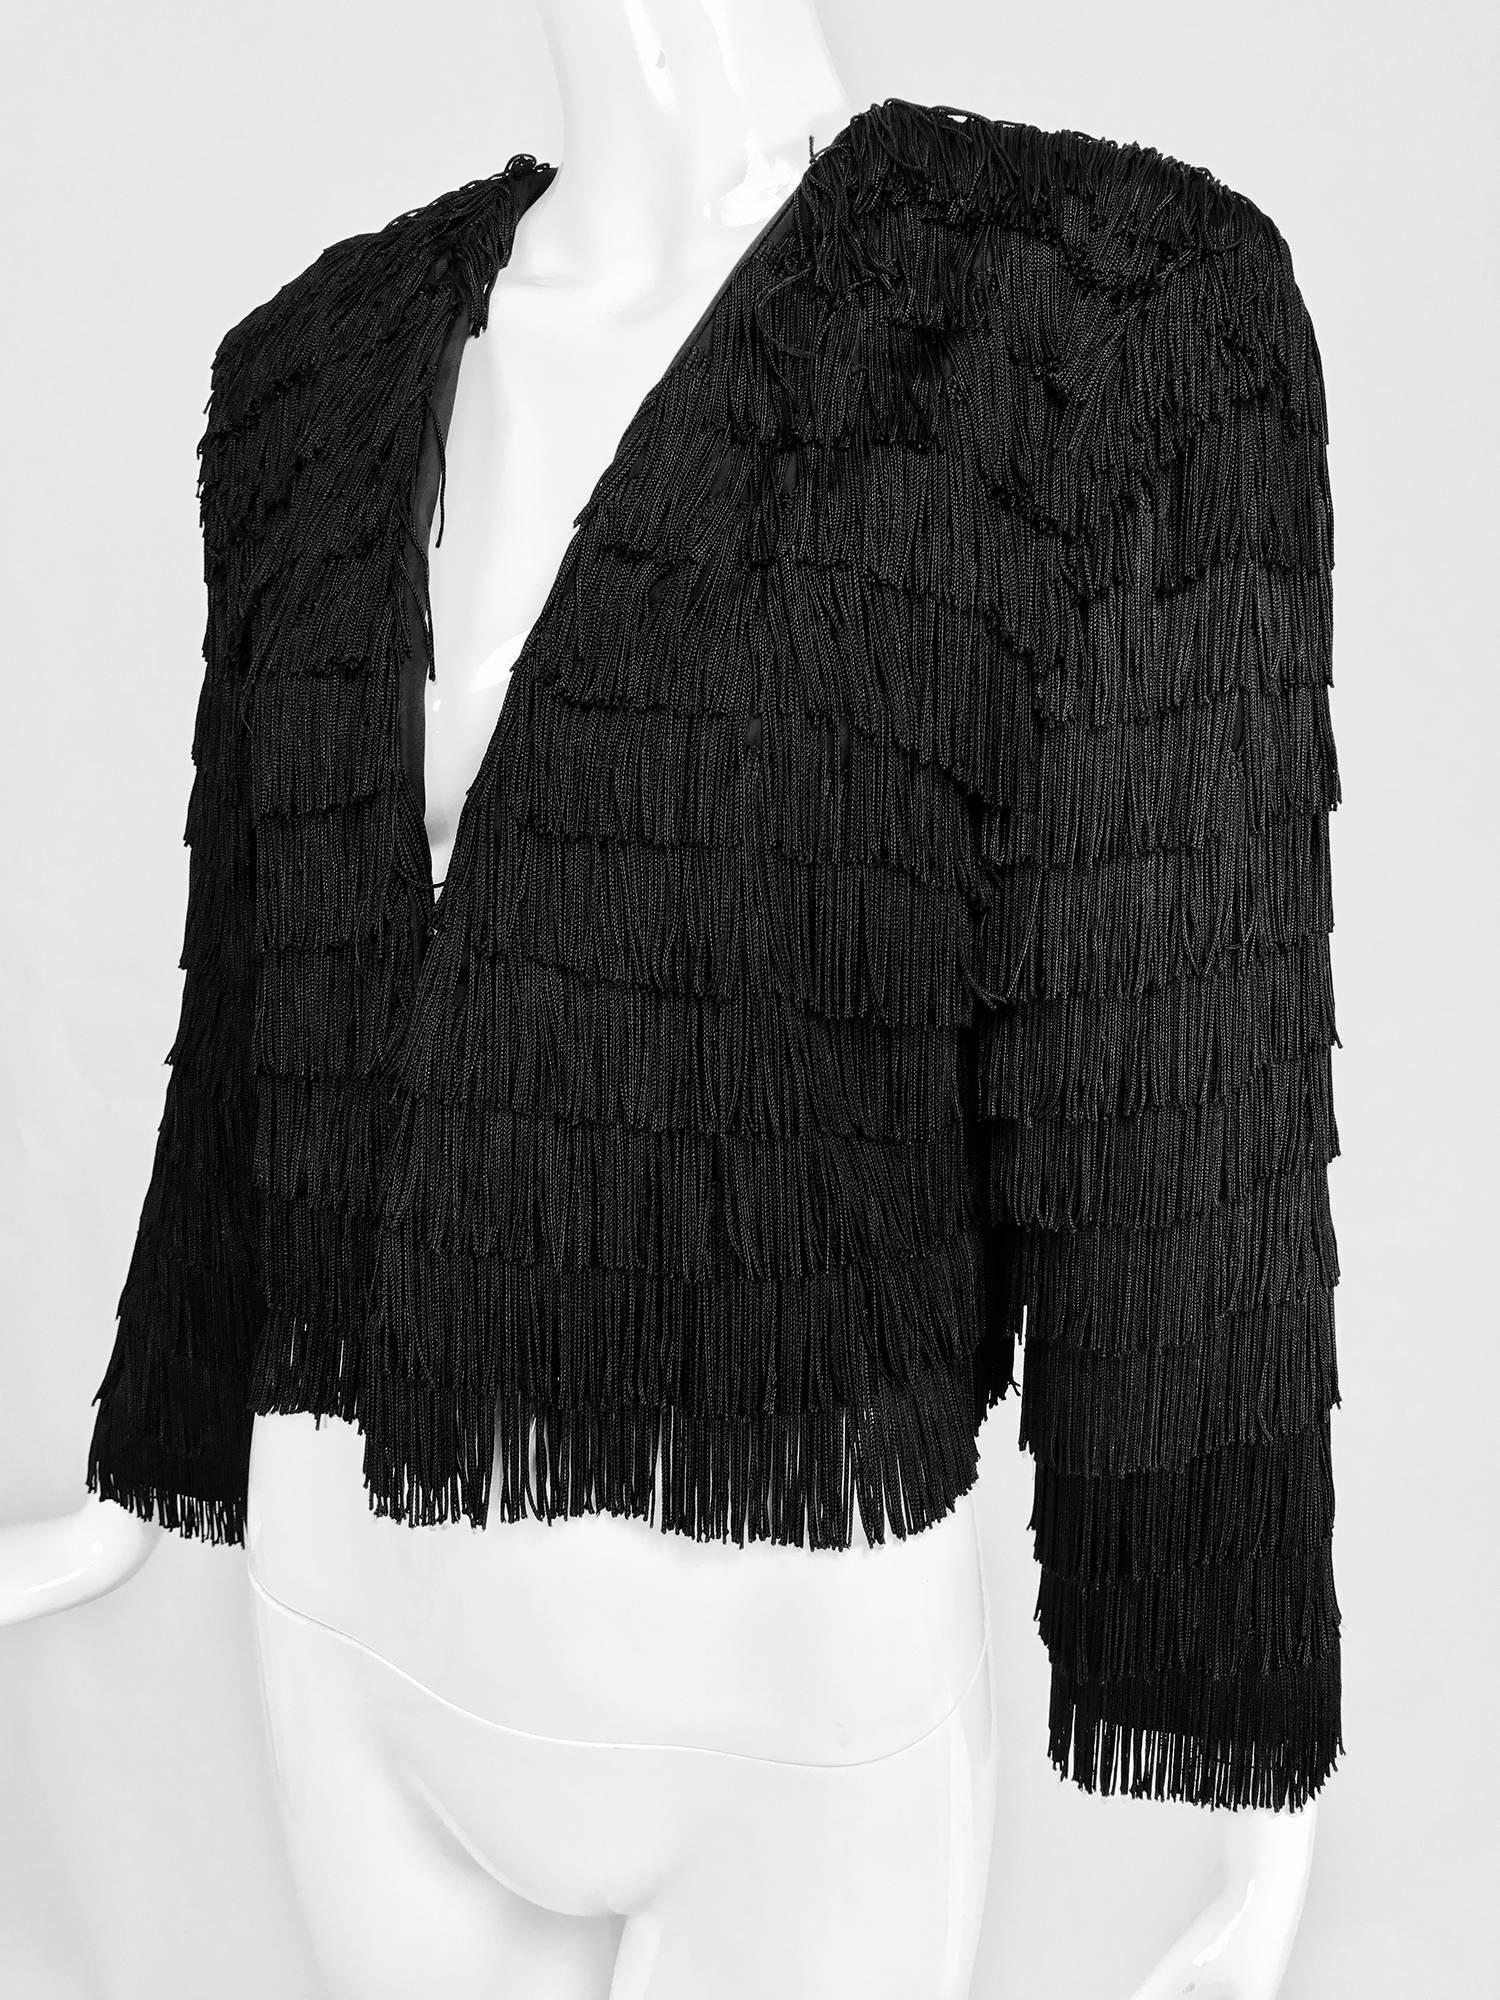 Dramatic Black crepe totally fringed jacket from the early 1980s...Open front jacket with long sleeves is covered in horizontal, row after row, black fringe...Extremely well made and in excellent barely worn condition, the label has been